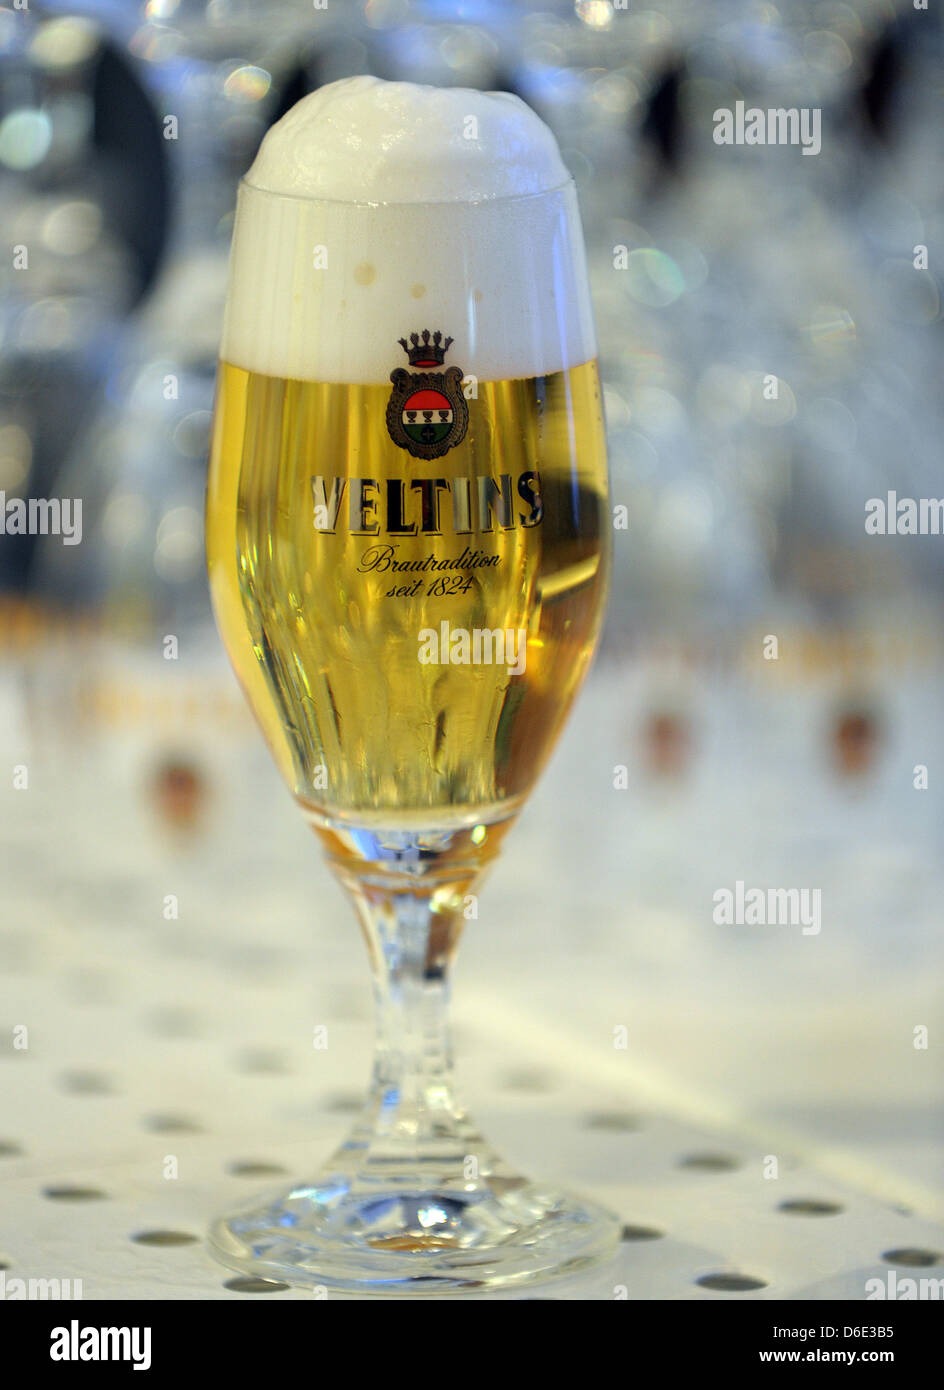 A glass of Veltins beer is seen in Duesseldorf, Germany, 17 January 2012.  The private brewery